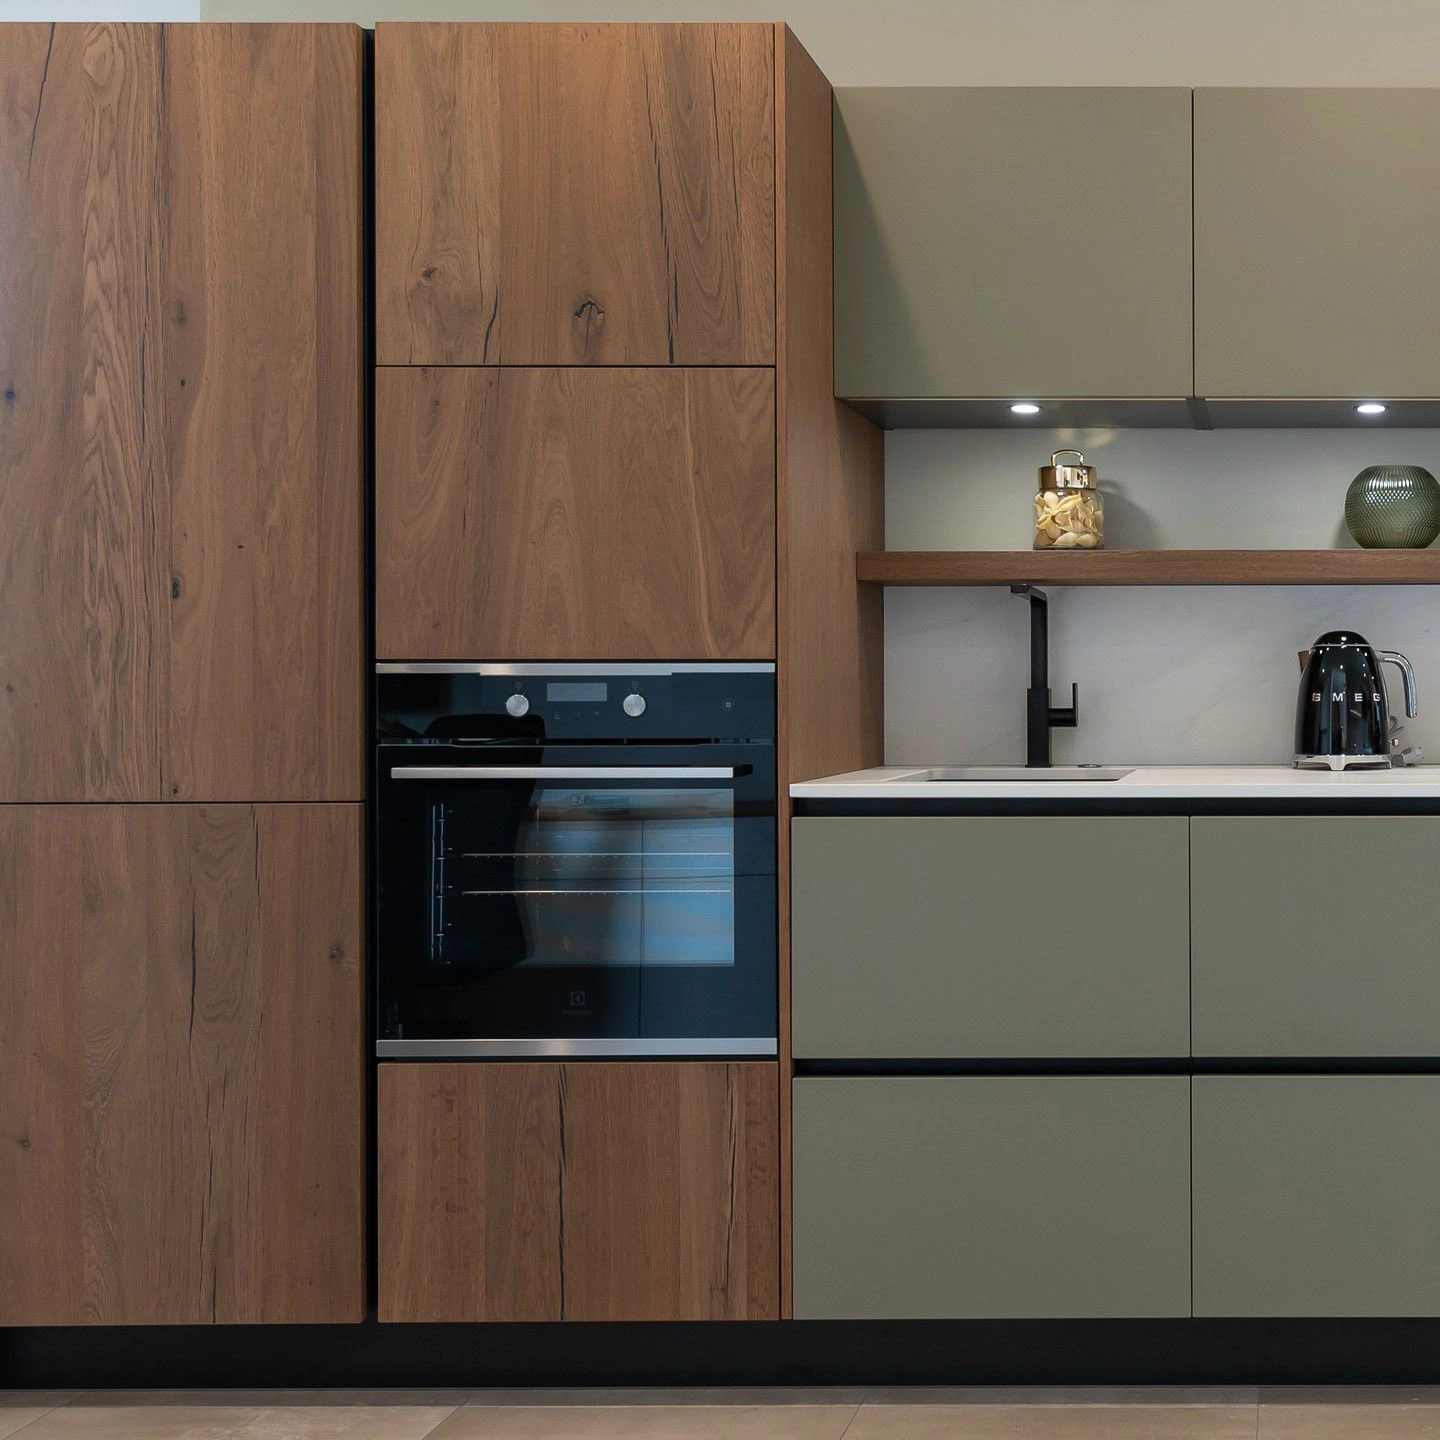 Olive grey RAL 7002 kitchen cabinets